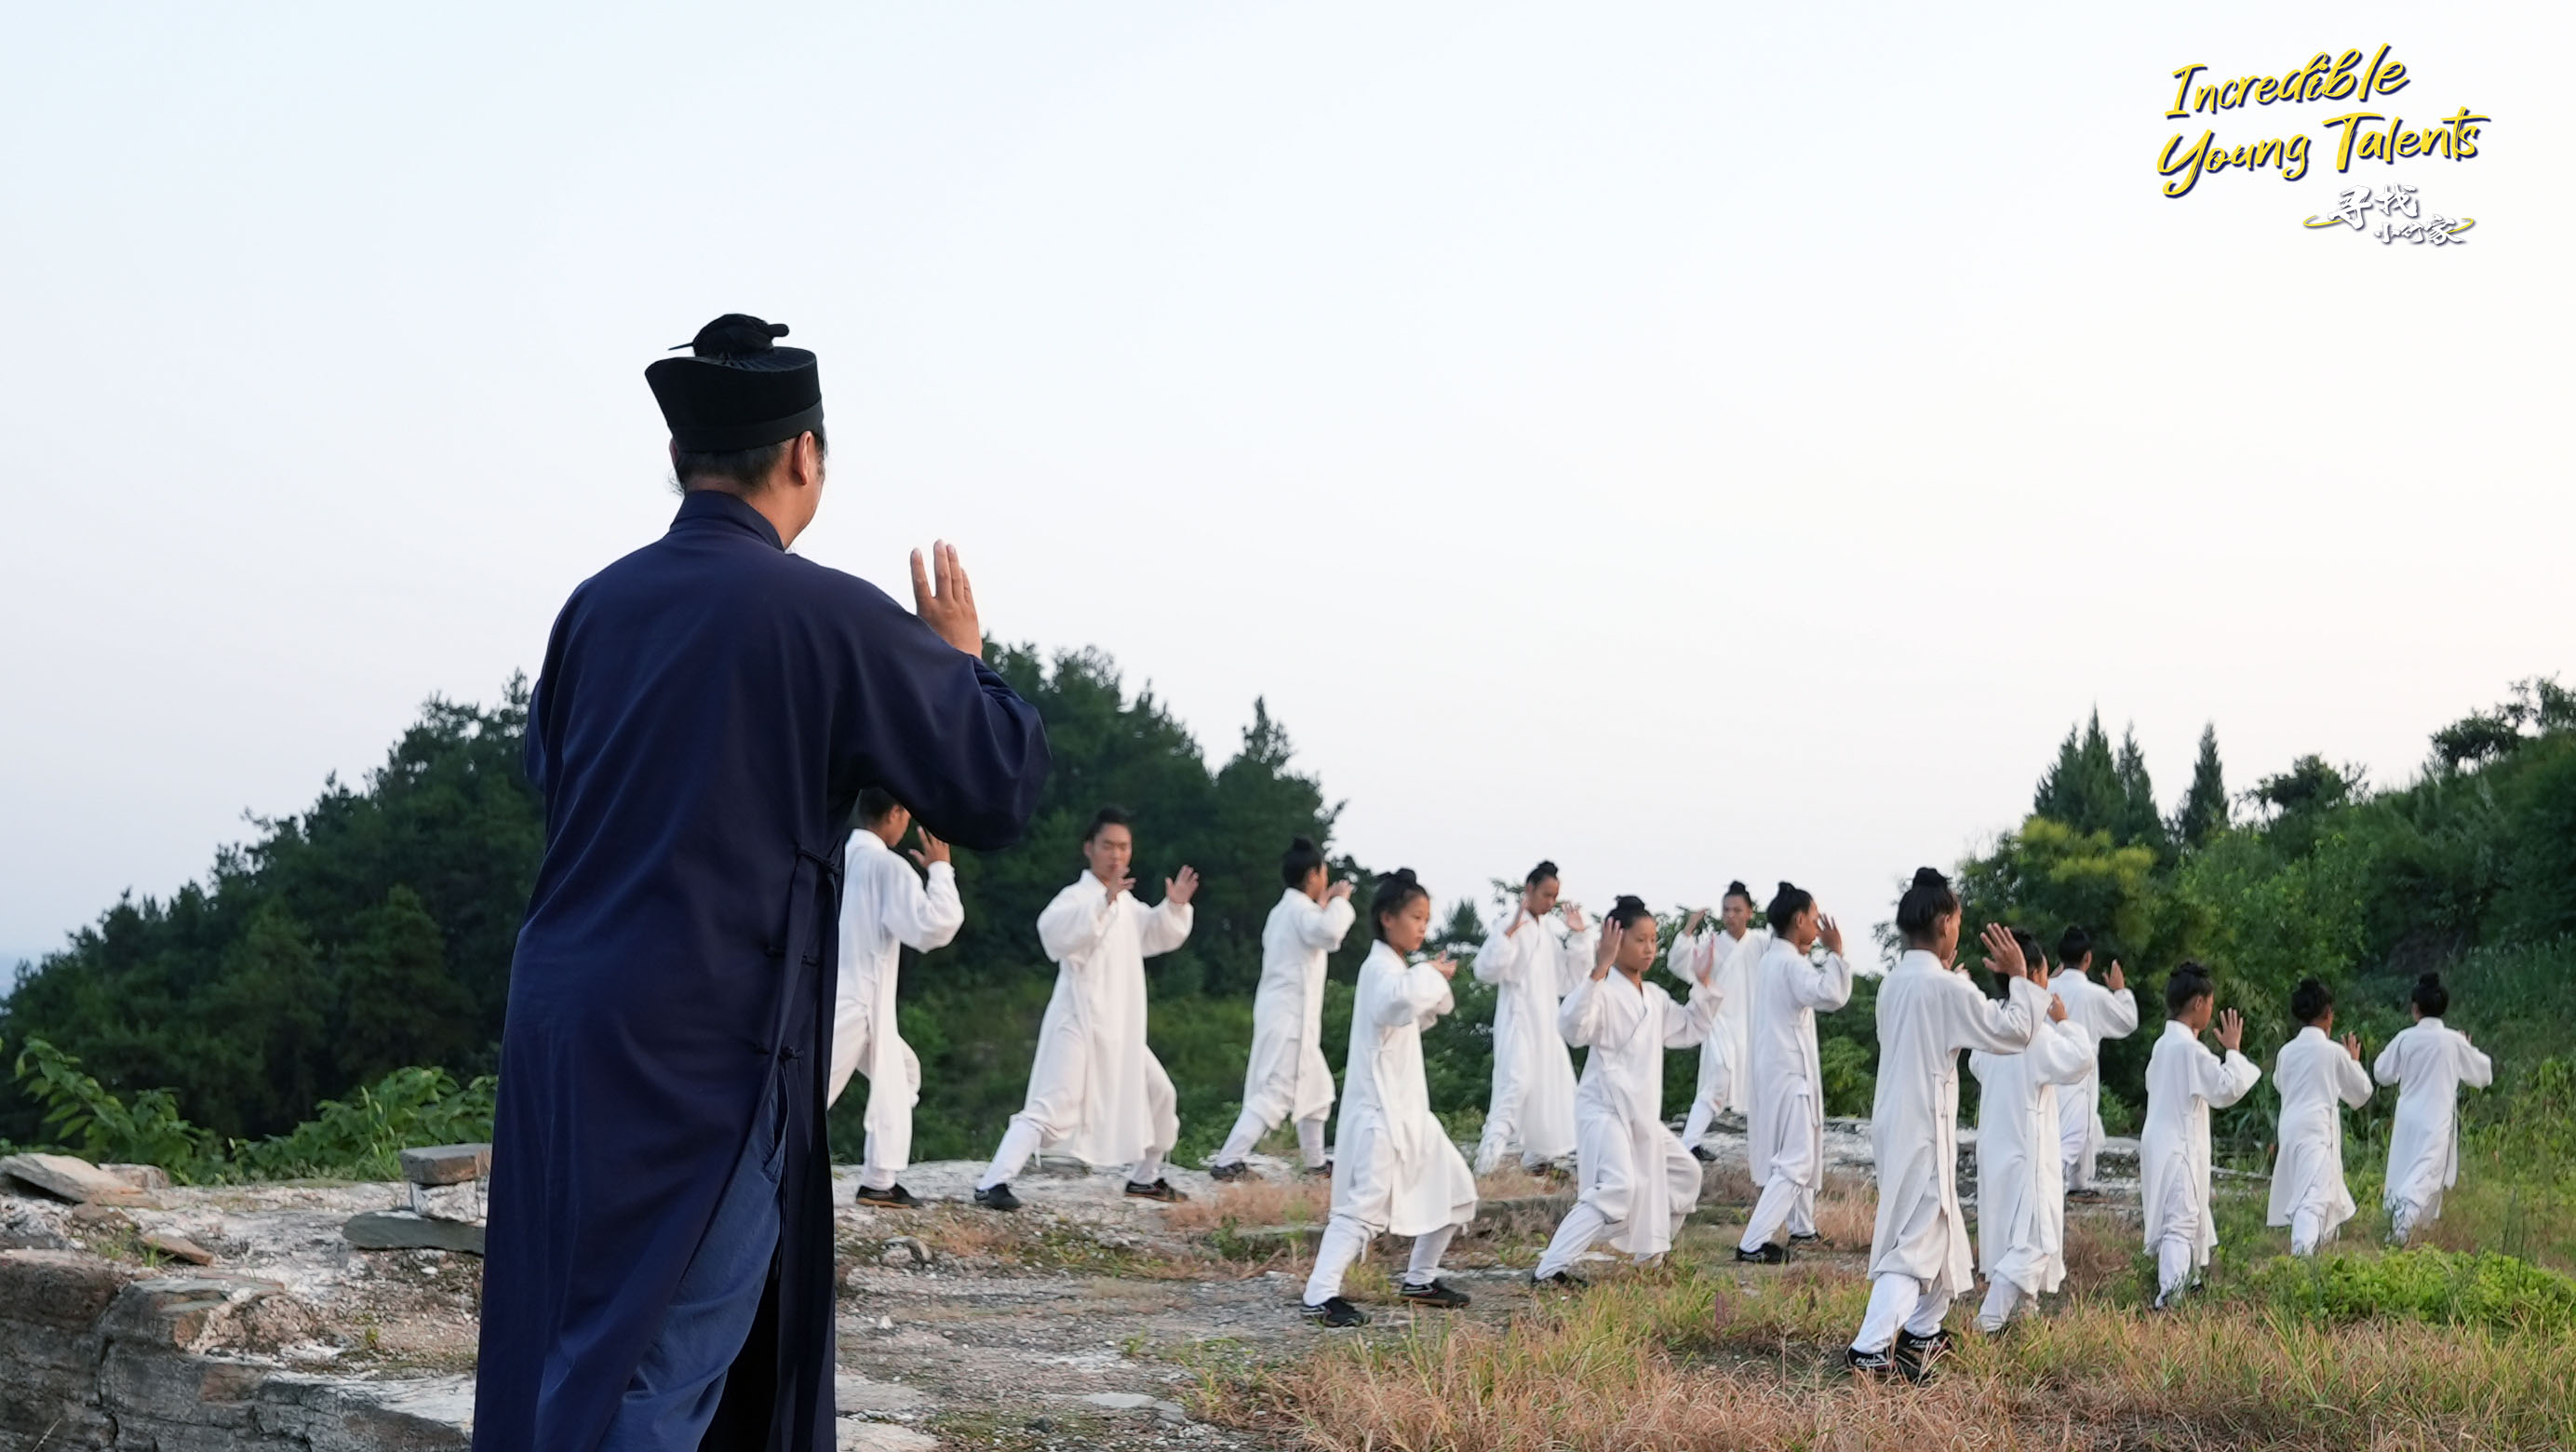 Tai Chi master Hu Weizhe (left) teaches young apprentices basic routines in the Wudang Mountains. /CGTN